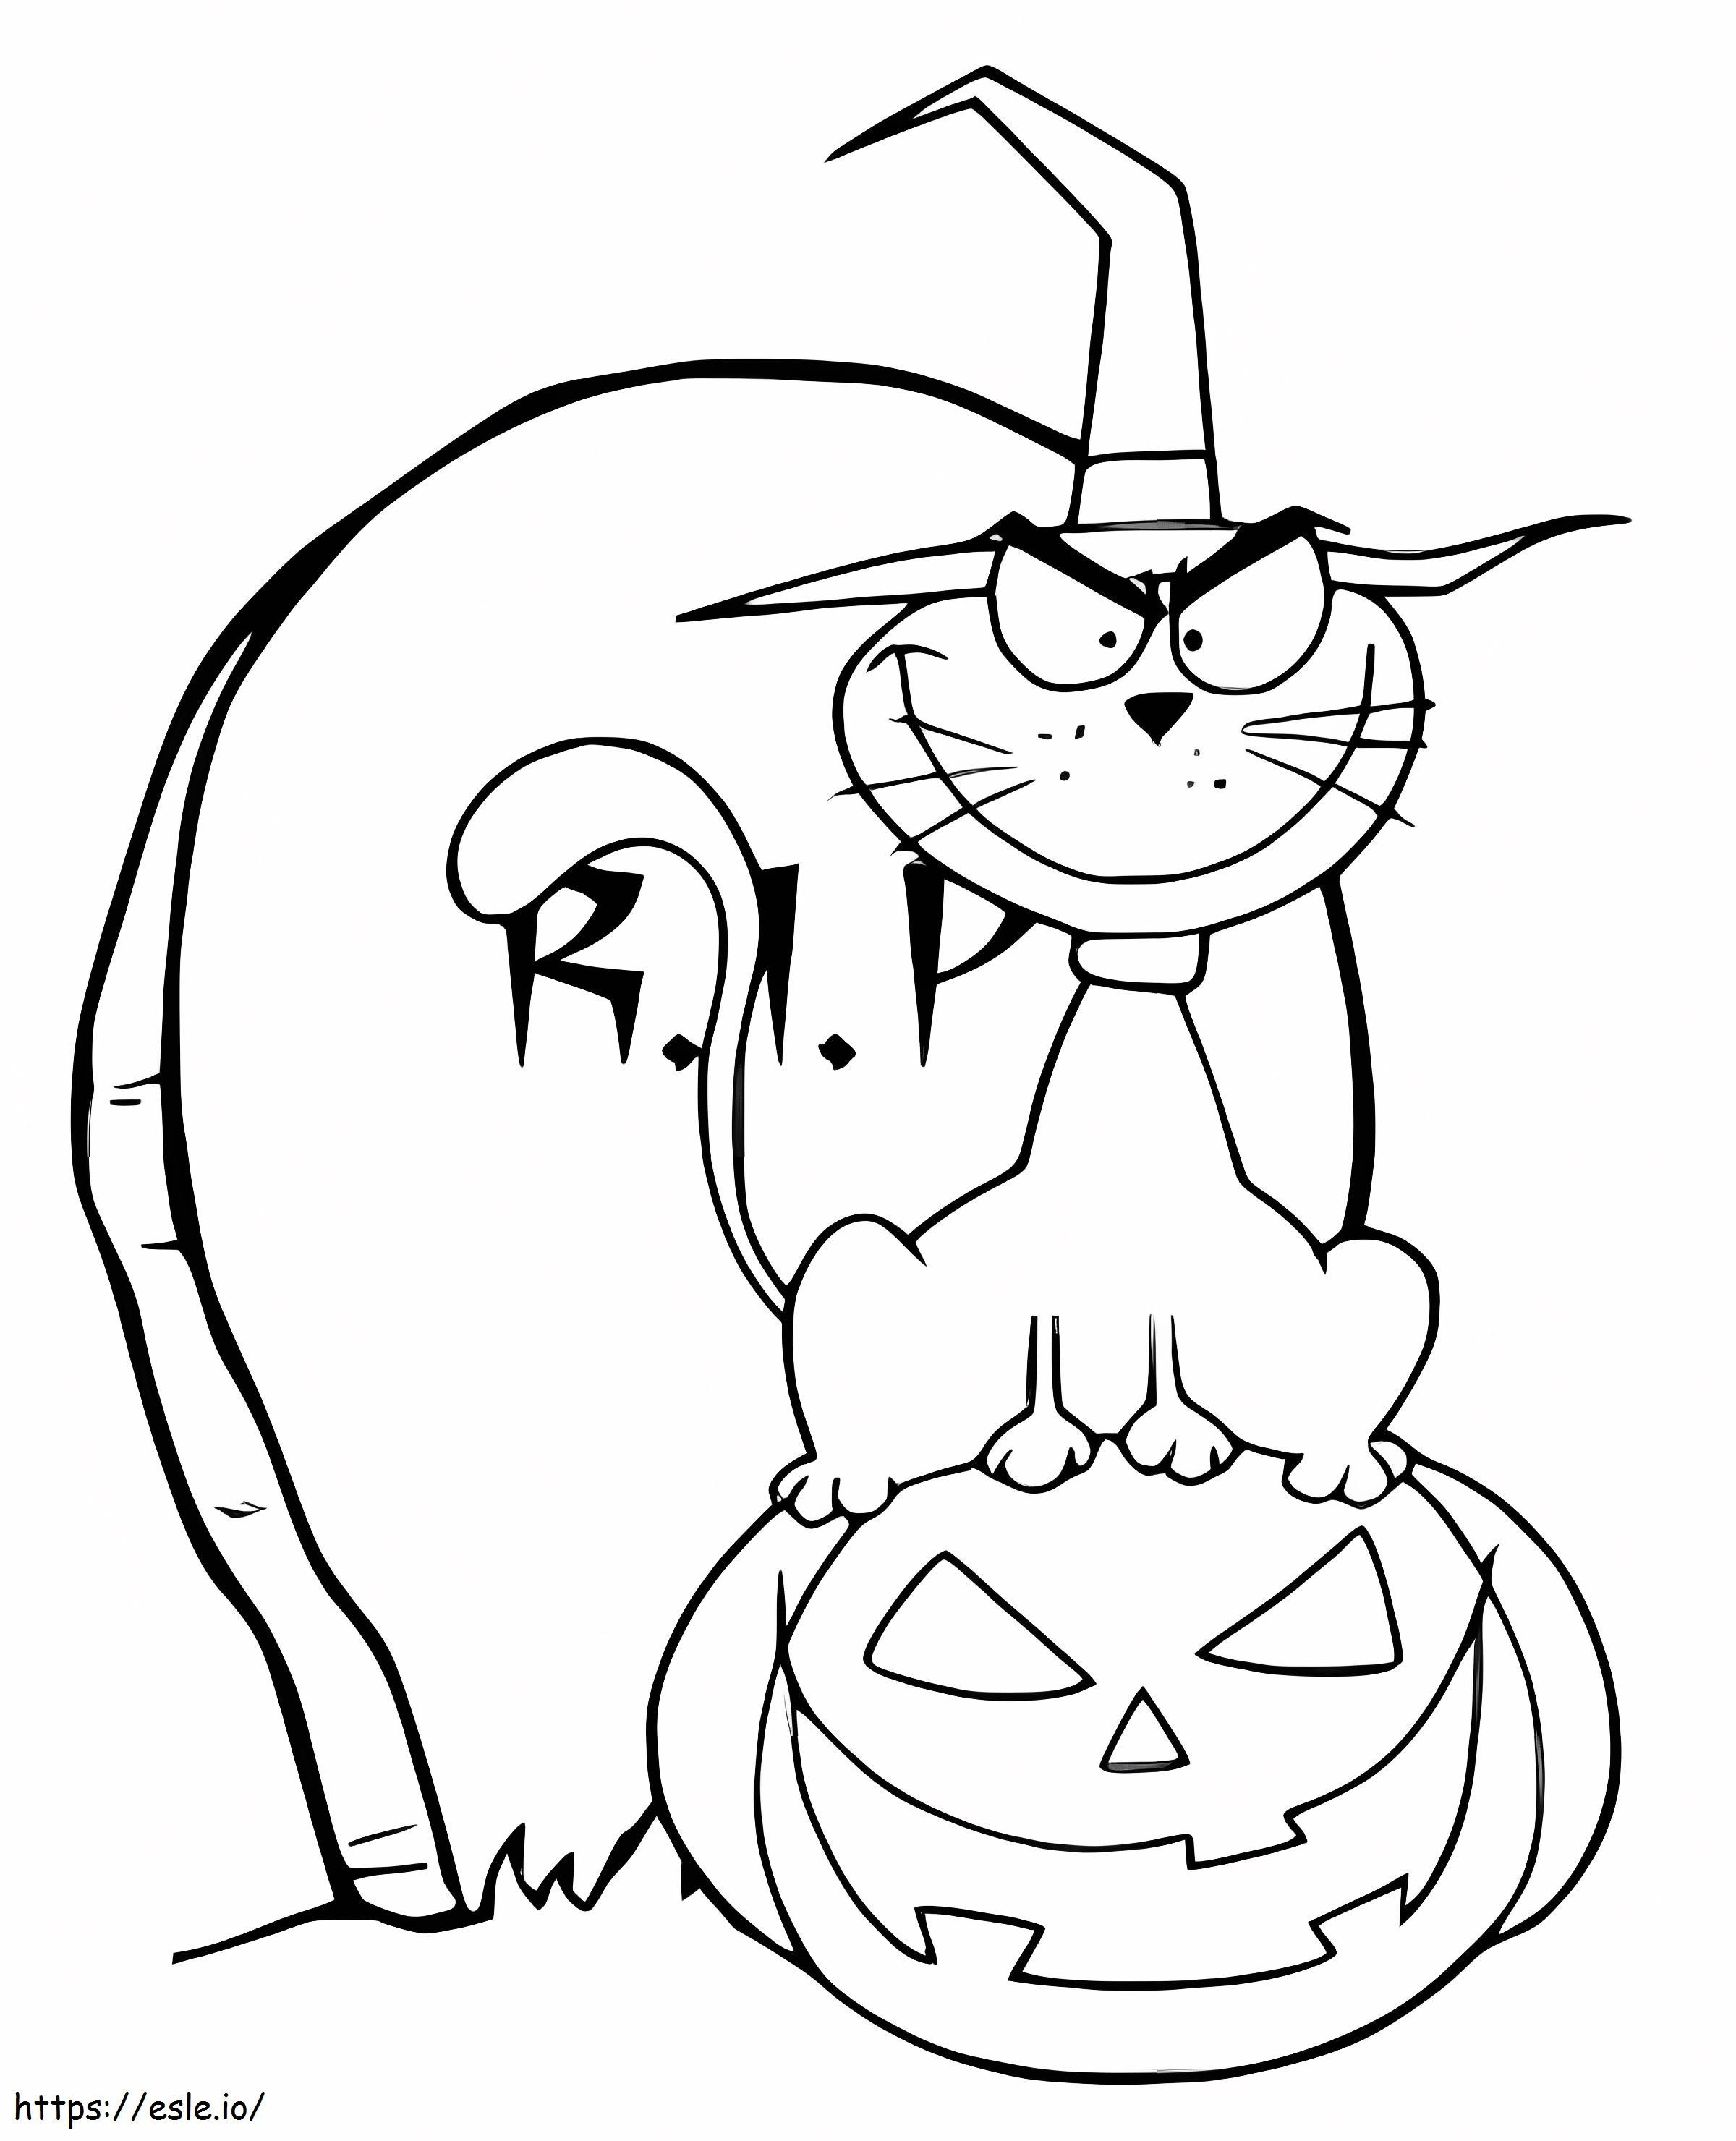 Tombstone 10 coloring page